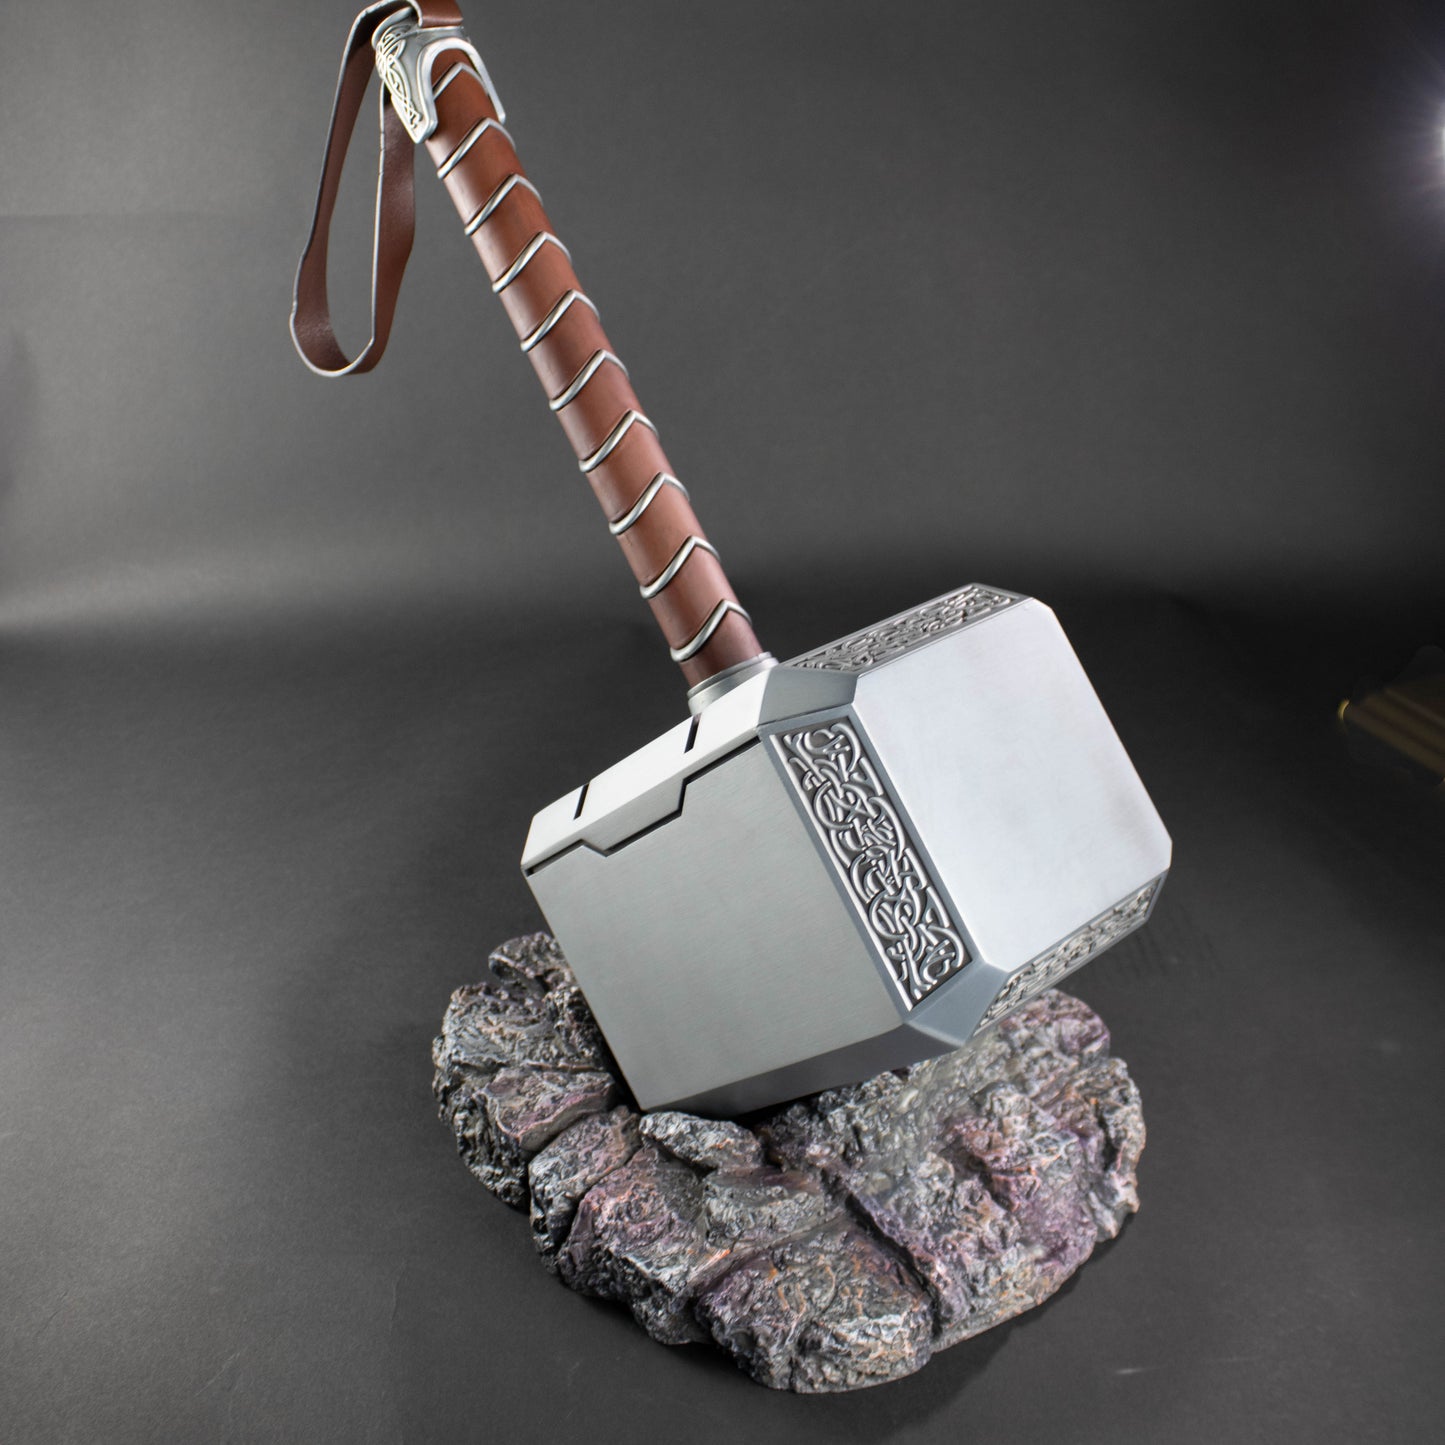 Thor Hammer Mjolnir Steel Prop Replica With Display Base